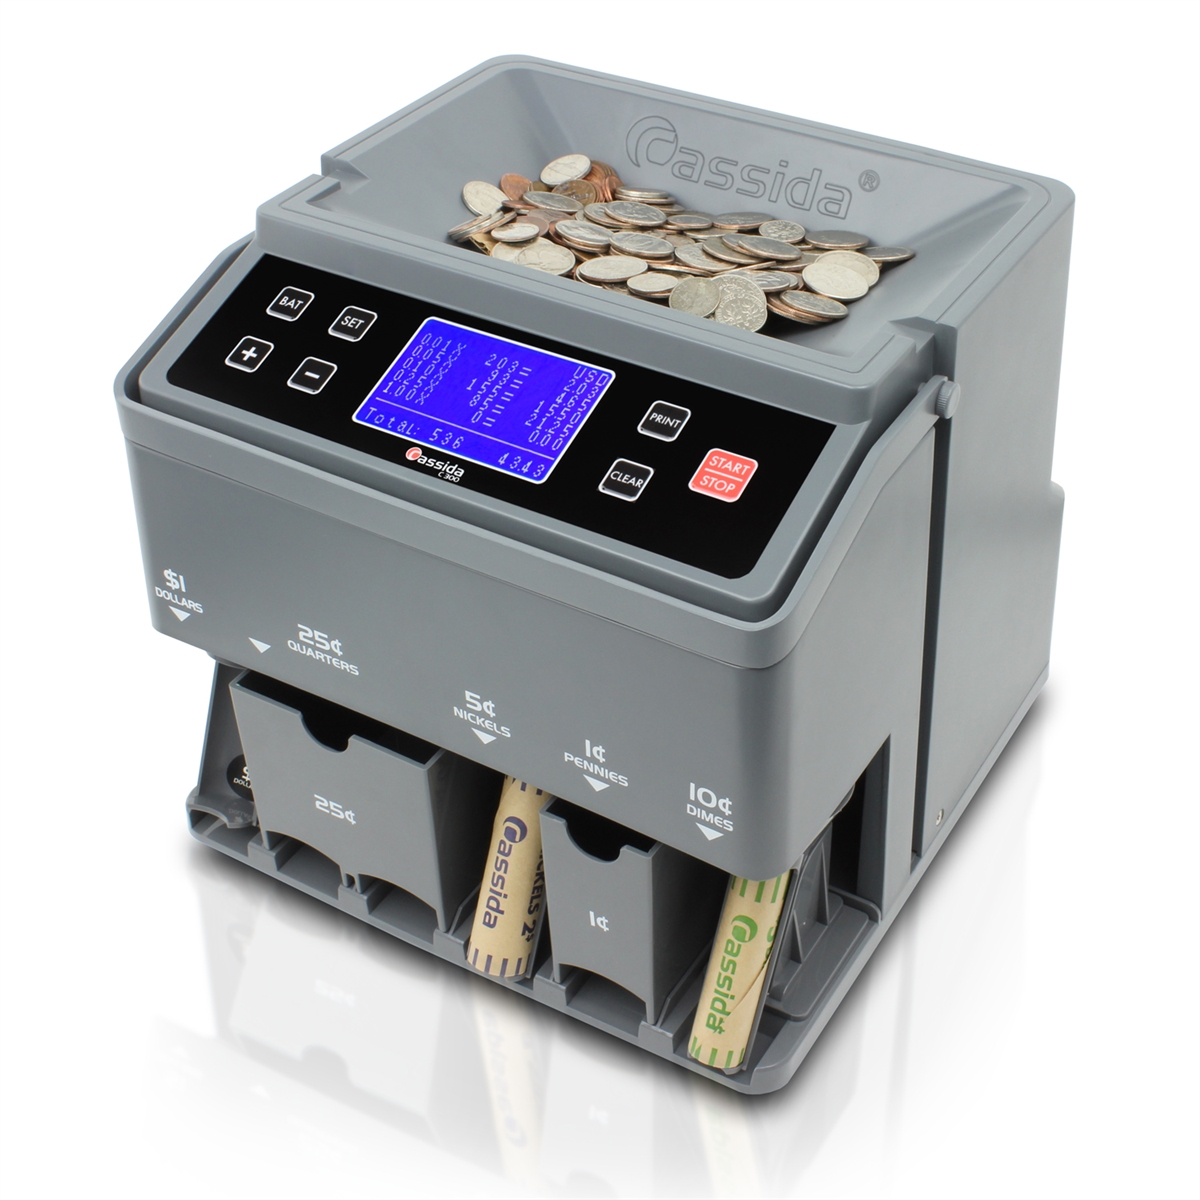  Ribao HCS-3300 High Speed Coin Counter, Heavy Duty Bank Grade  Coin Sorter with Large Hopper, Two-Year Warranty : Office Products